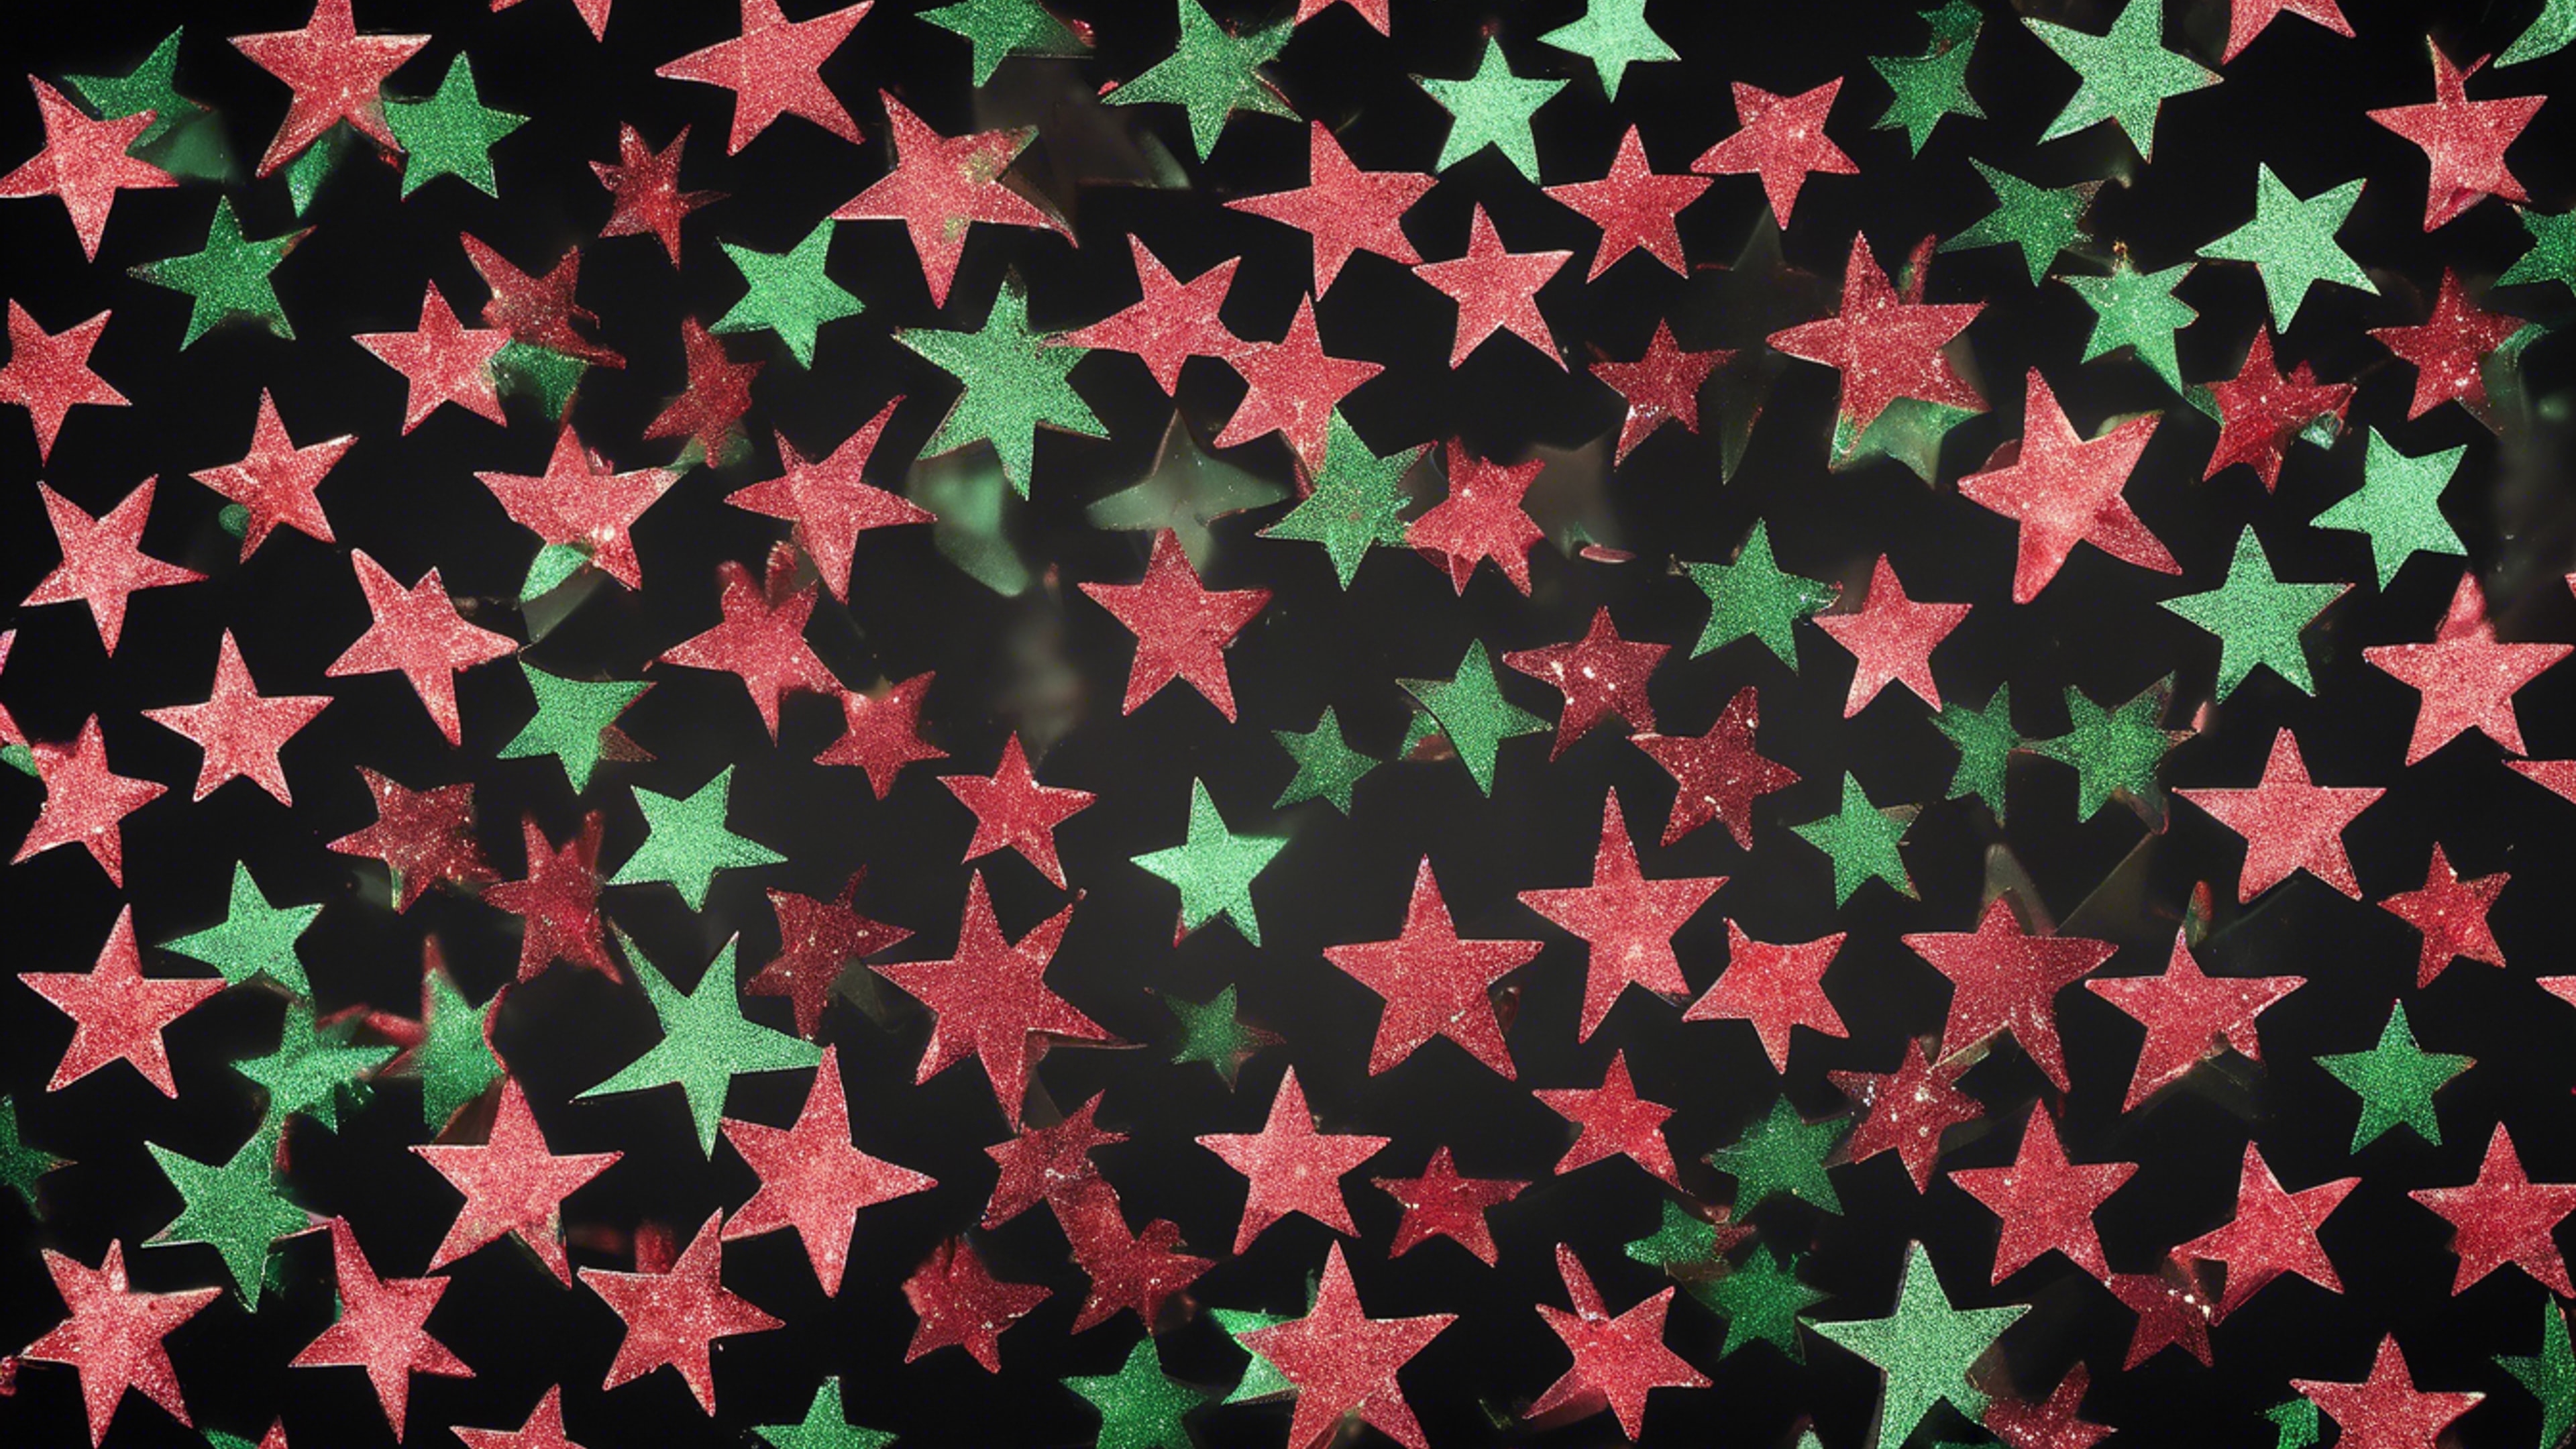 Green and red glitter forming star shapes on a black background Sfondo[2fe752b5dc5f4f35ba35]